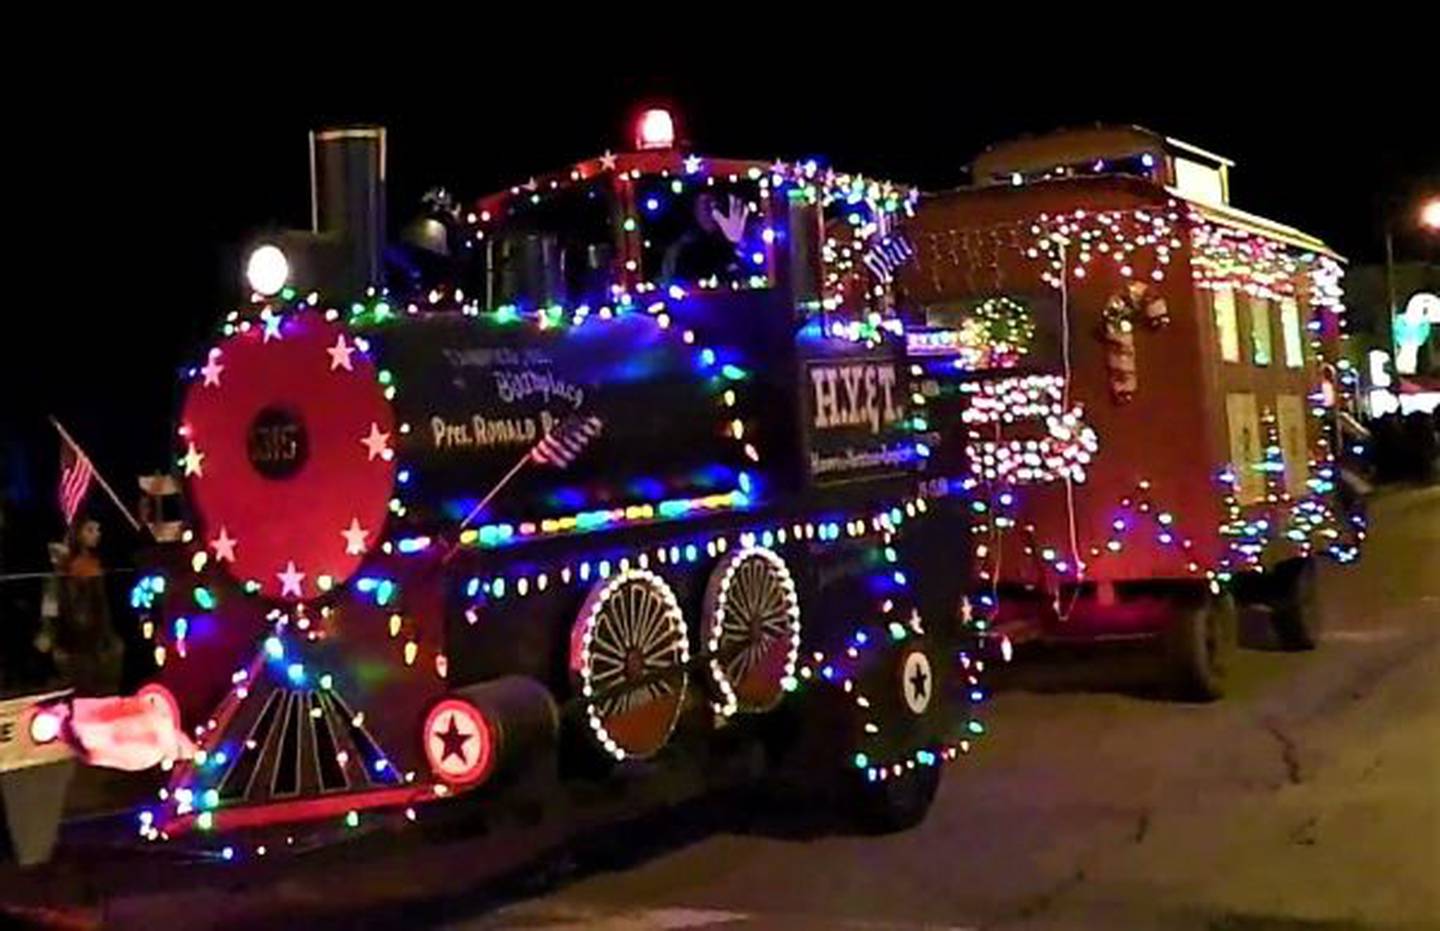 The Tampico Lions Club entered the HYT train and caboose and took grand prize for the Prophetstown Christmas Parade.